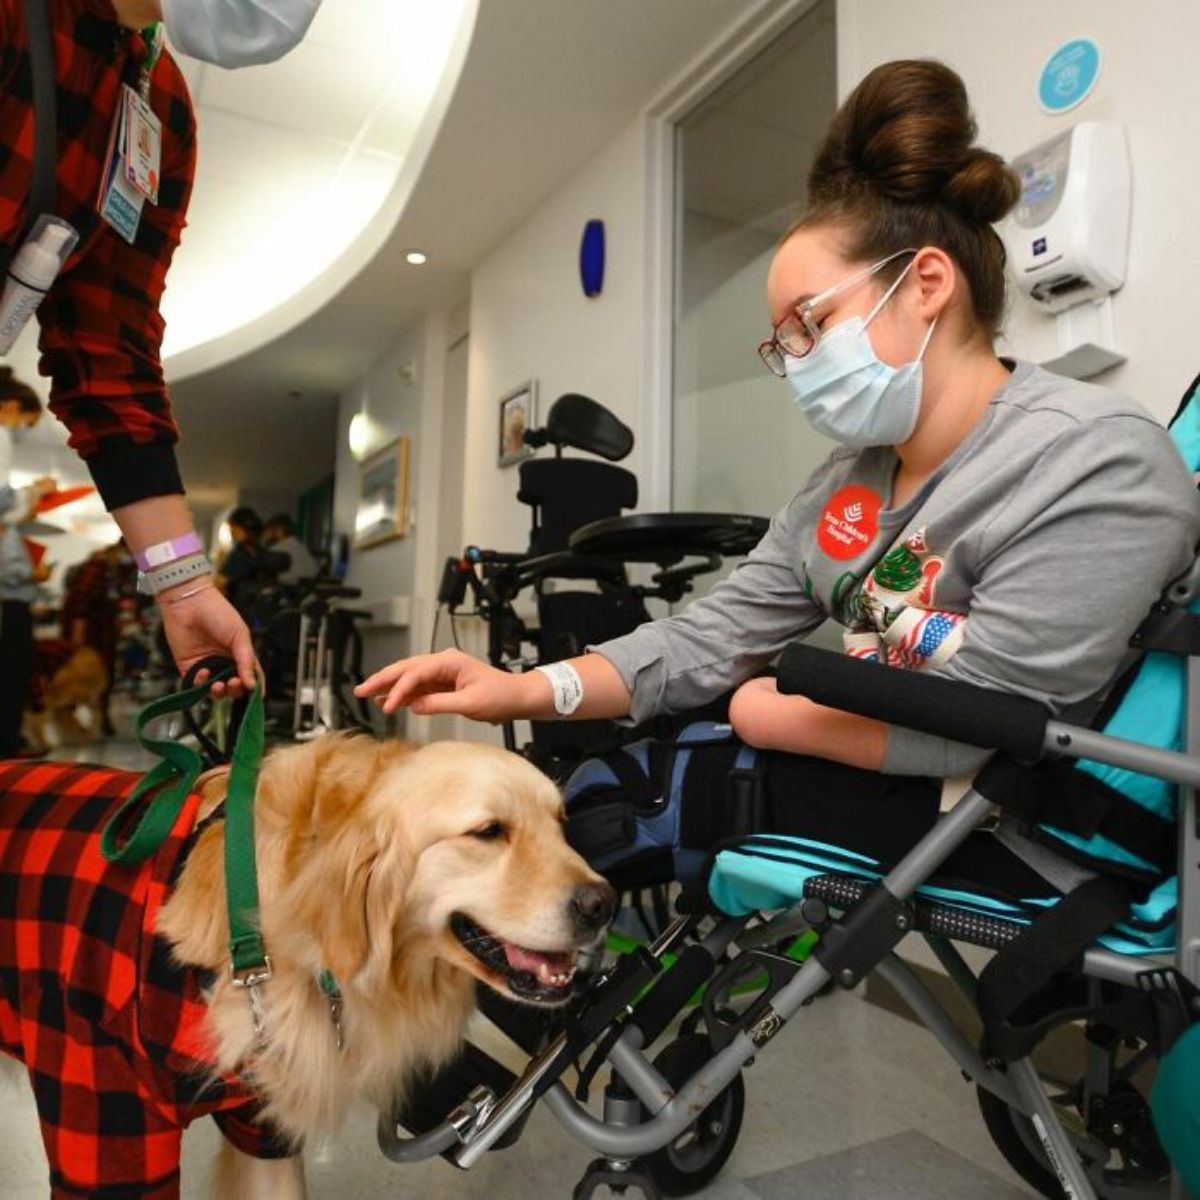 young girl in a wheelchair petting a golden retriever in a hospital hallway